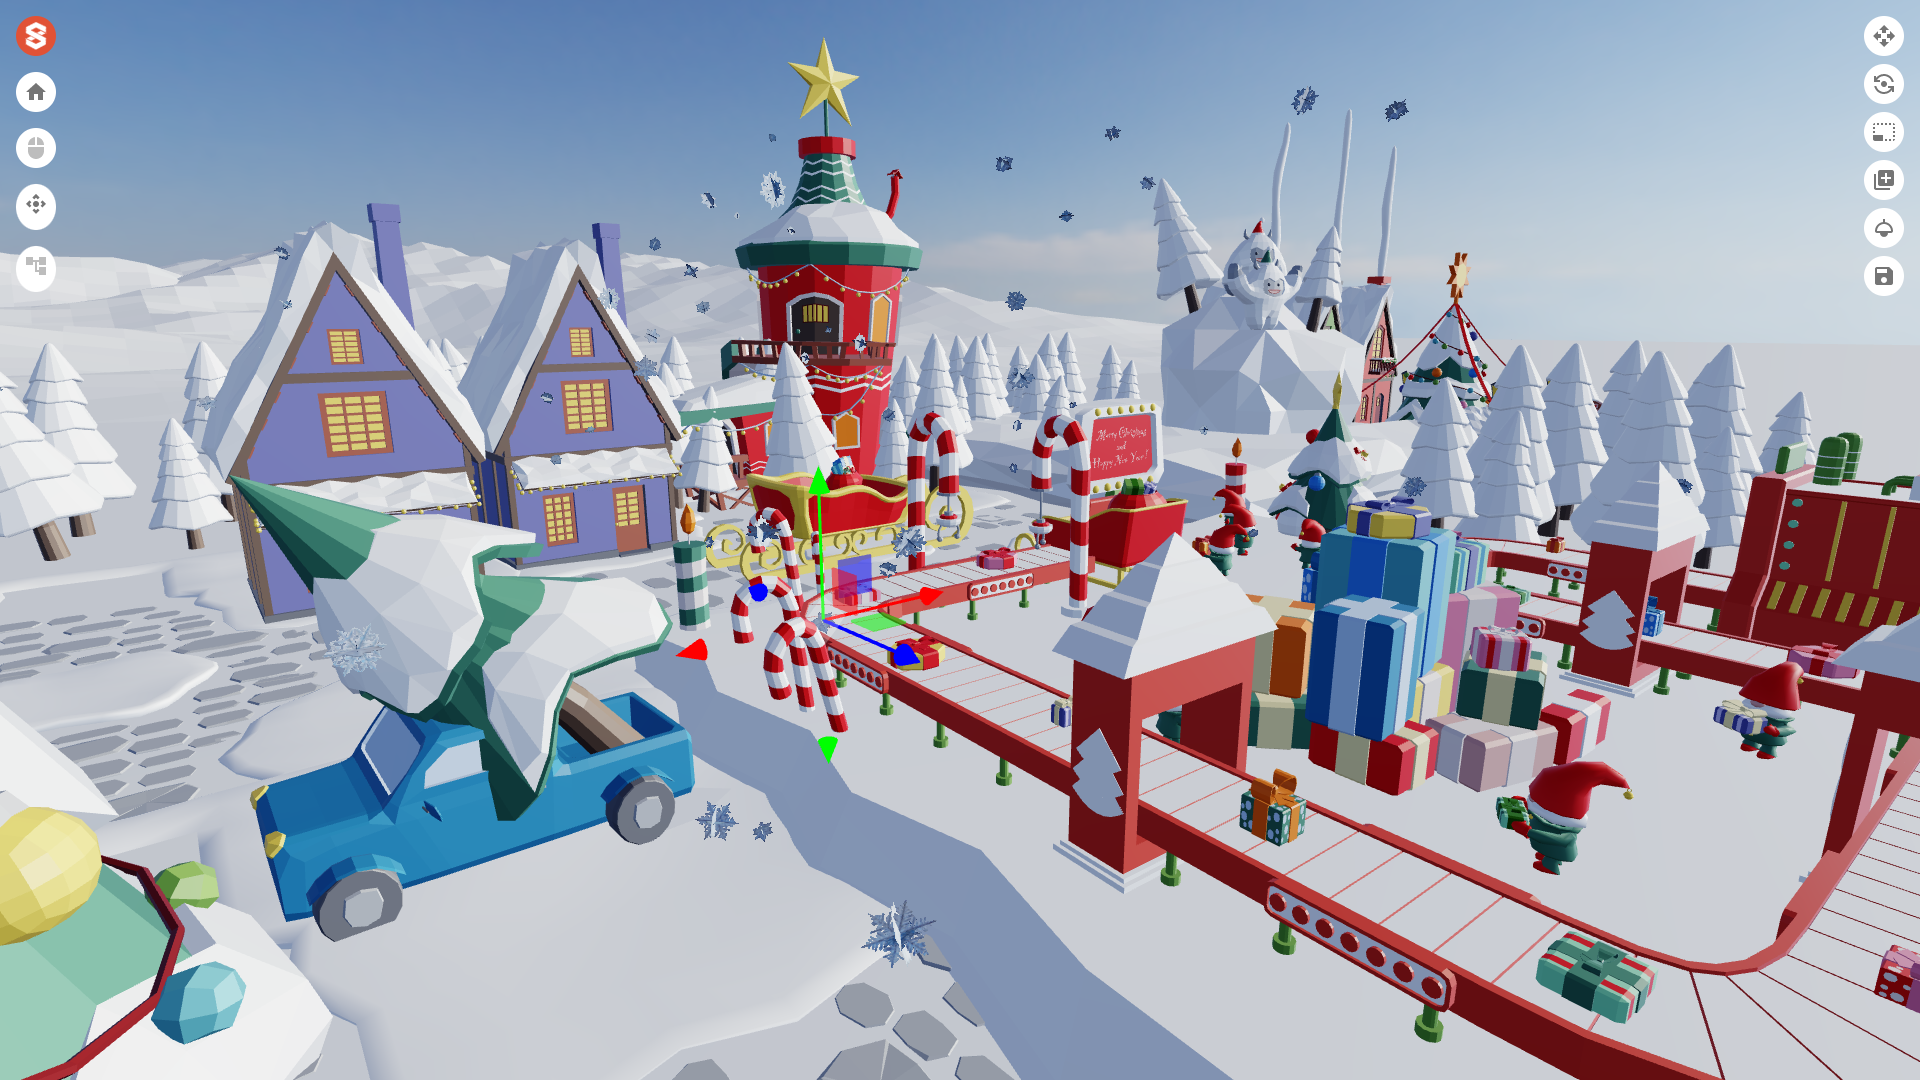 Design your own Christmas Village and have fun with family and friends (no BIM experience required) 🎅 🎄